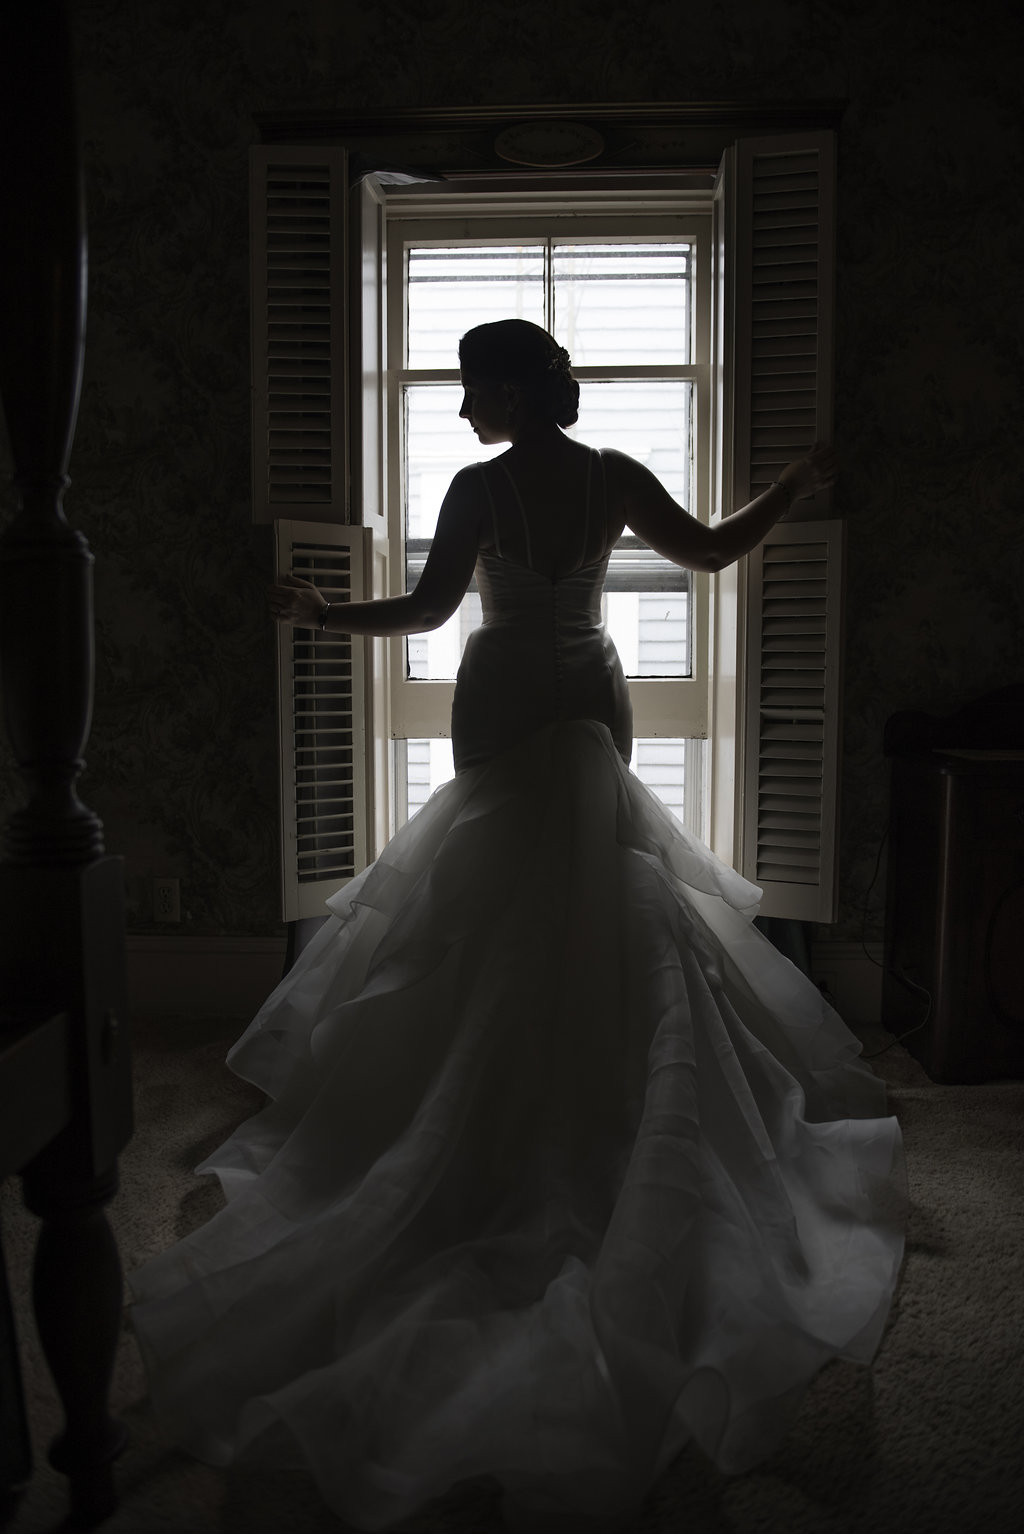 Silhouette of bride standing in front of window